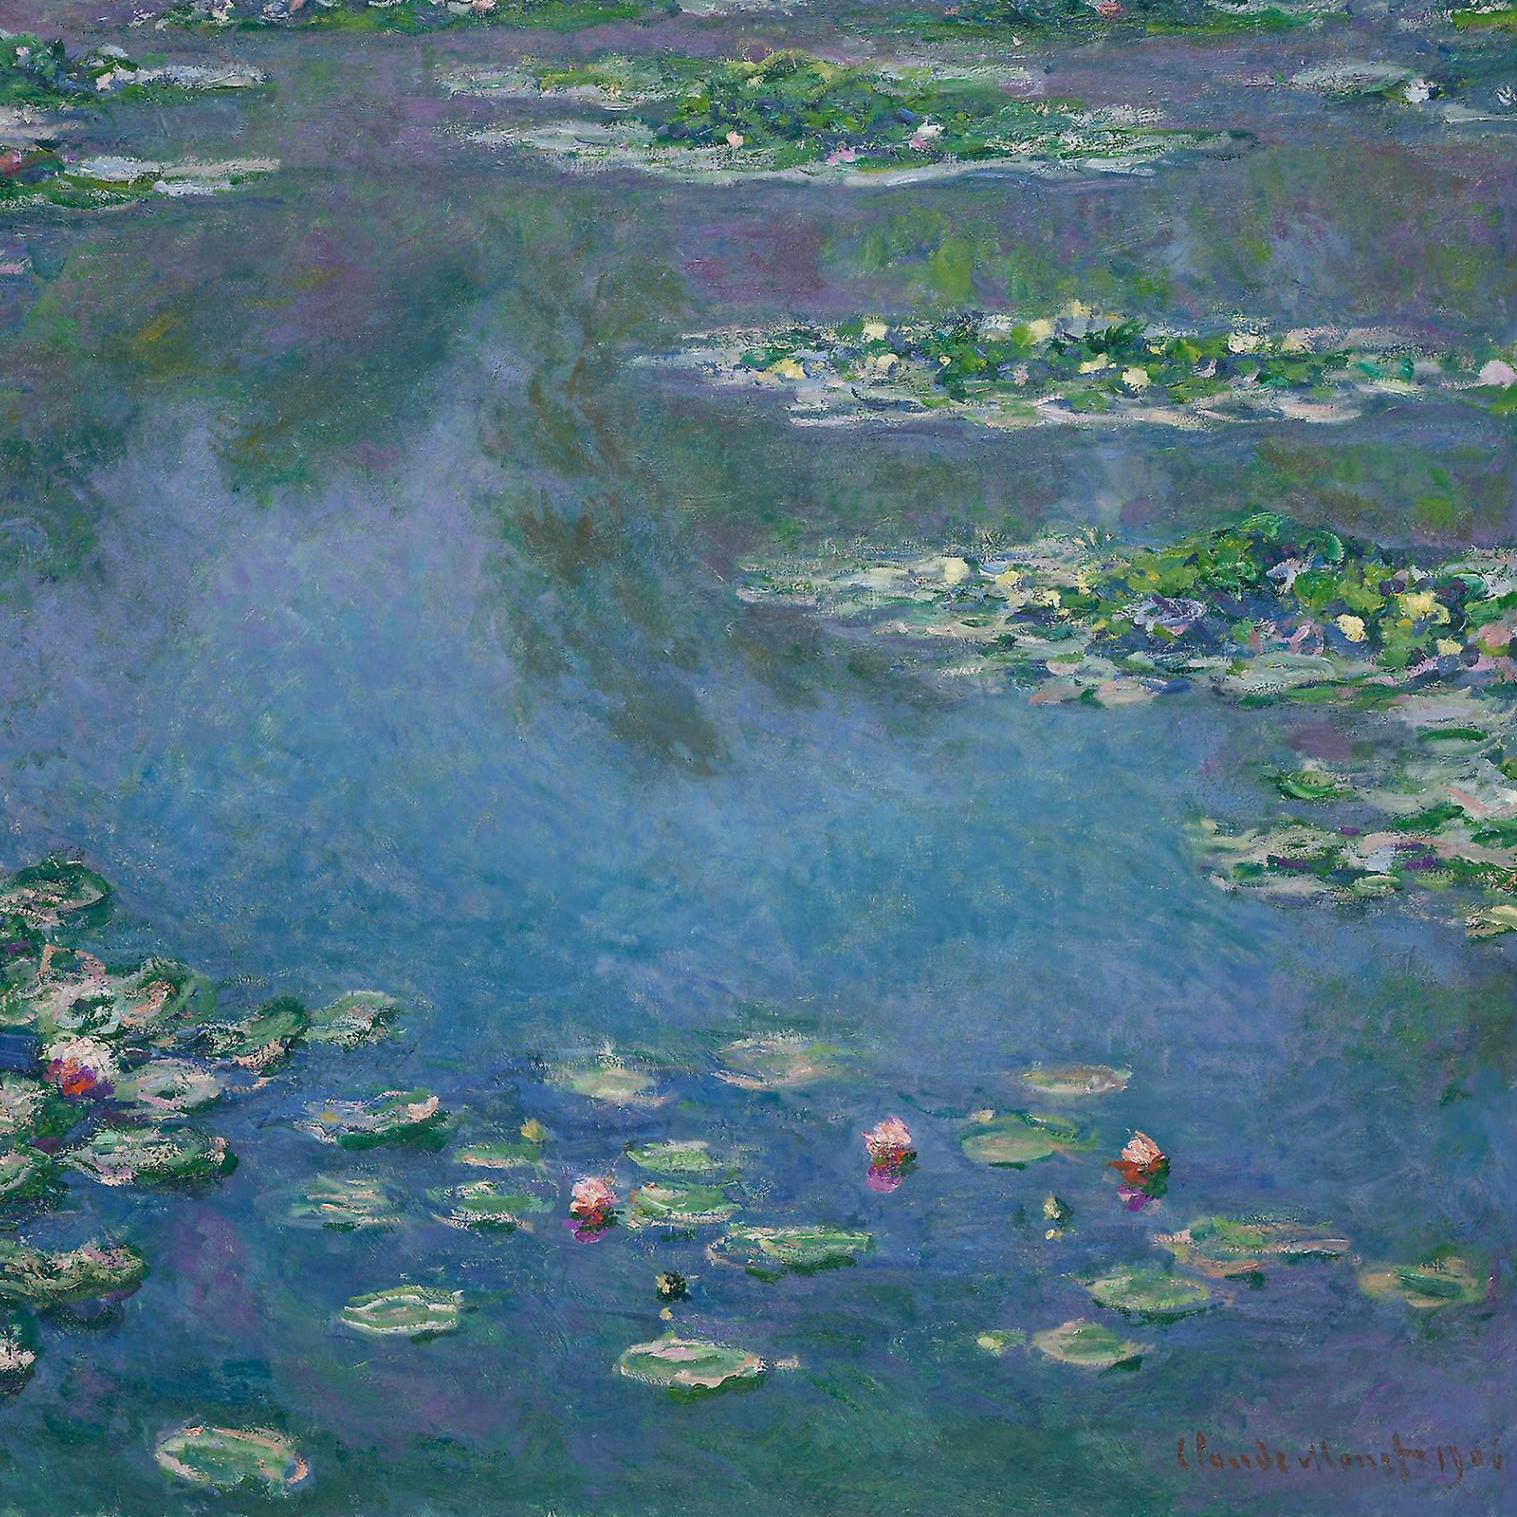 Exhibitions - The Art Institute of Chicago Explores the City’s Enduring Love of Monet